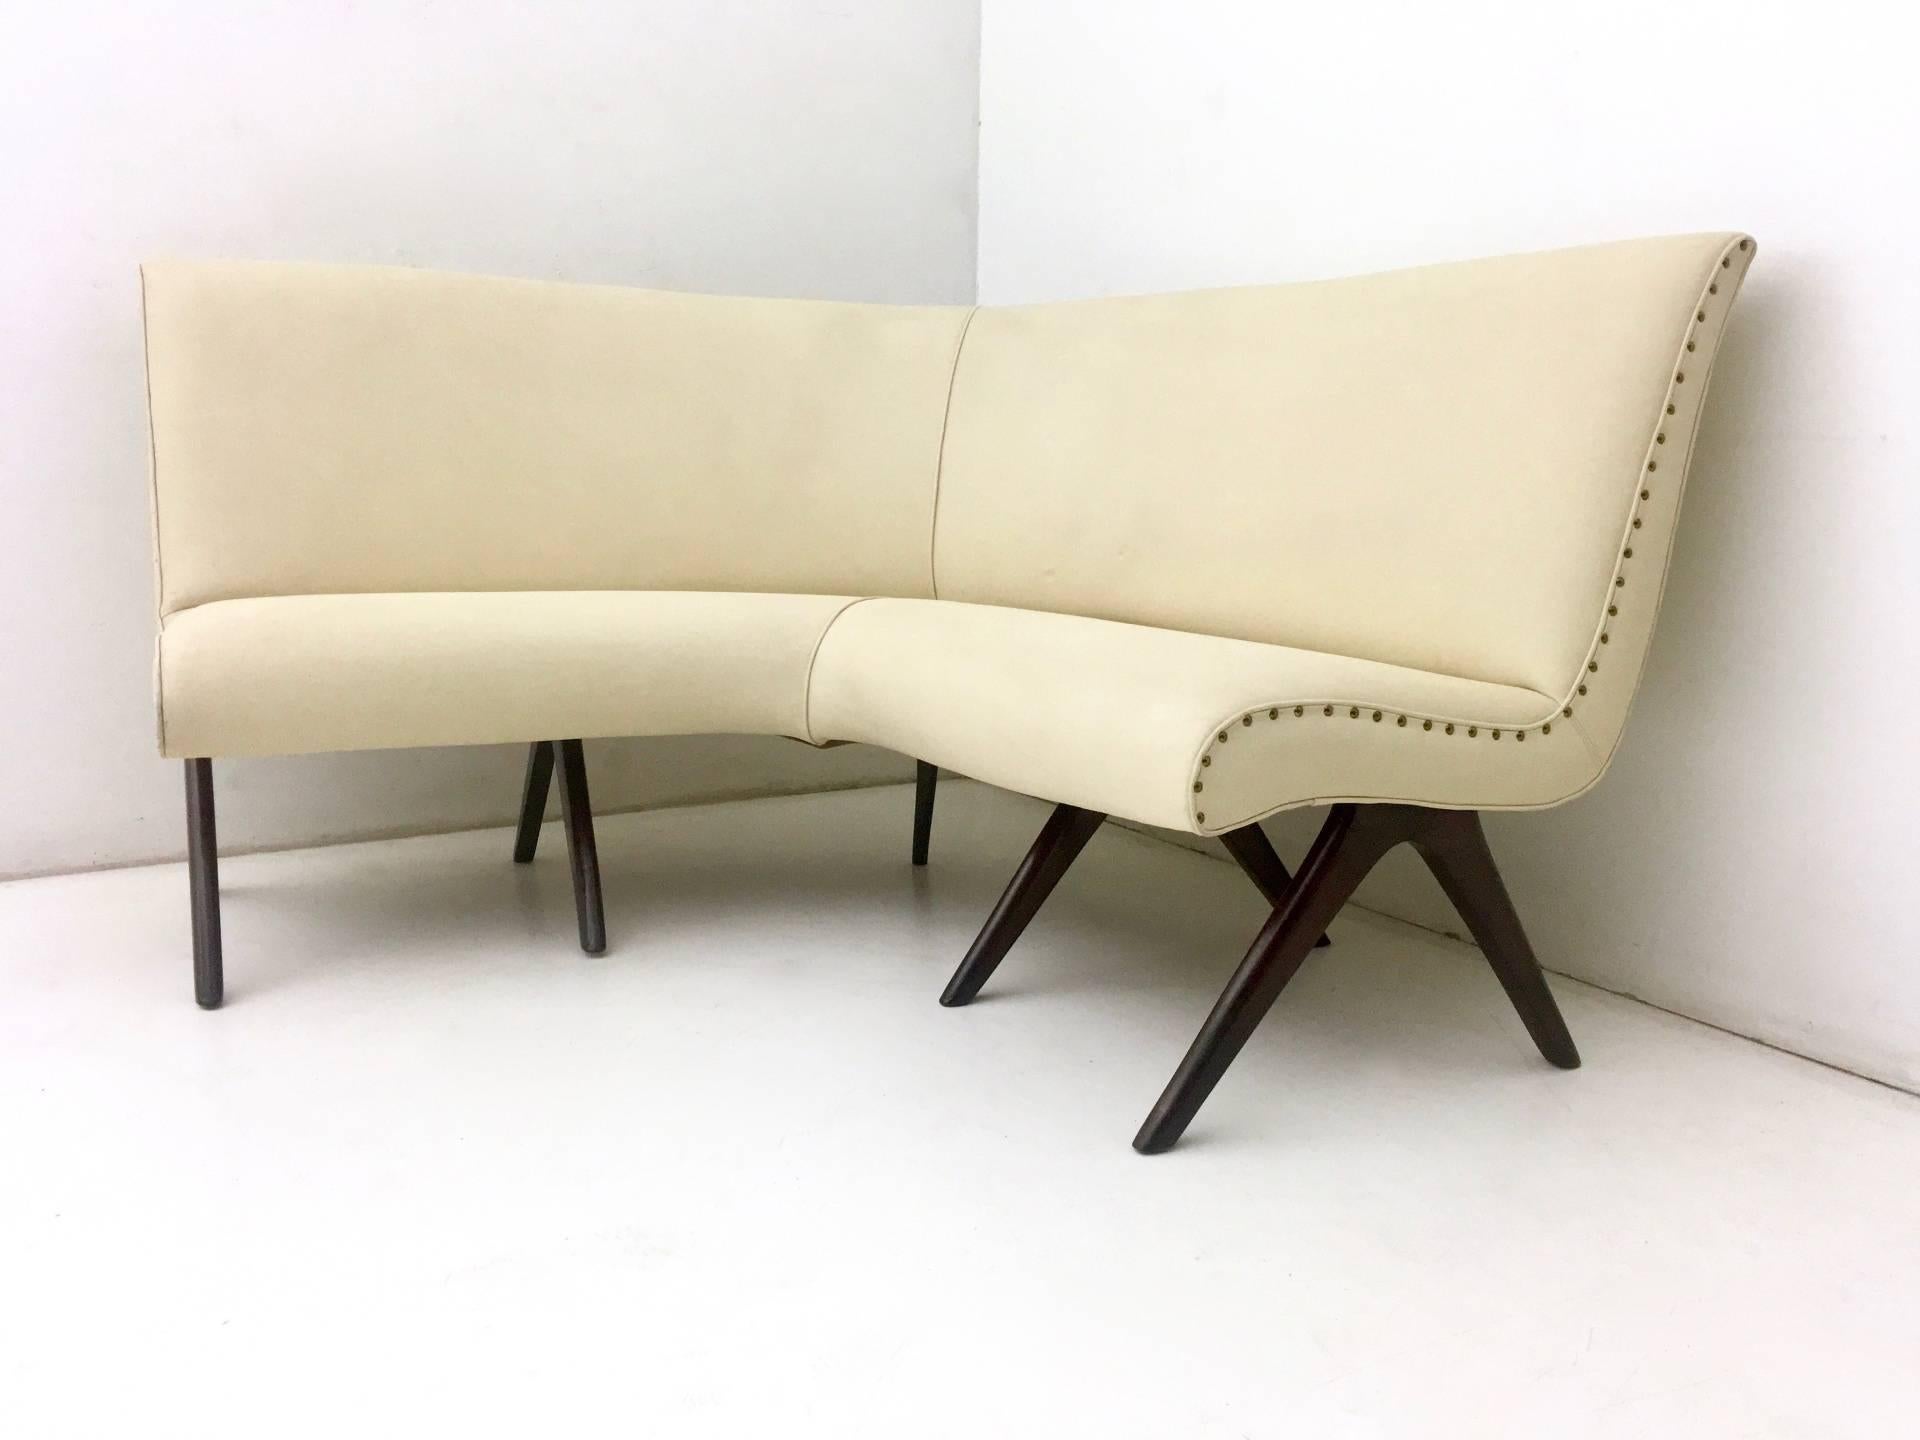 Italian Vintage Corner Sofa with Wooden Structure and Beige Skai Upholstery, Italy